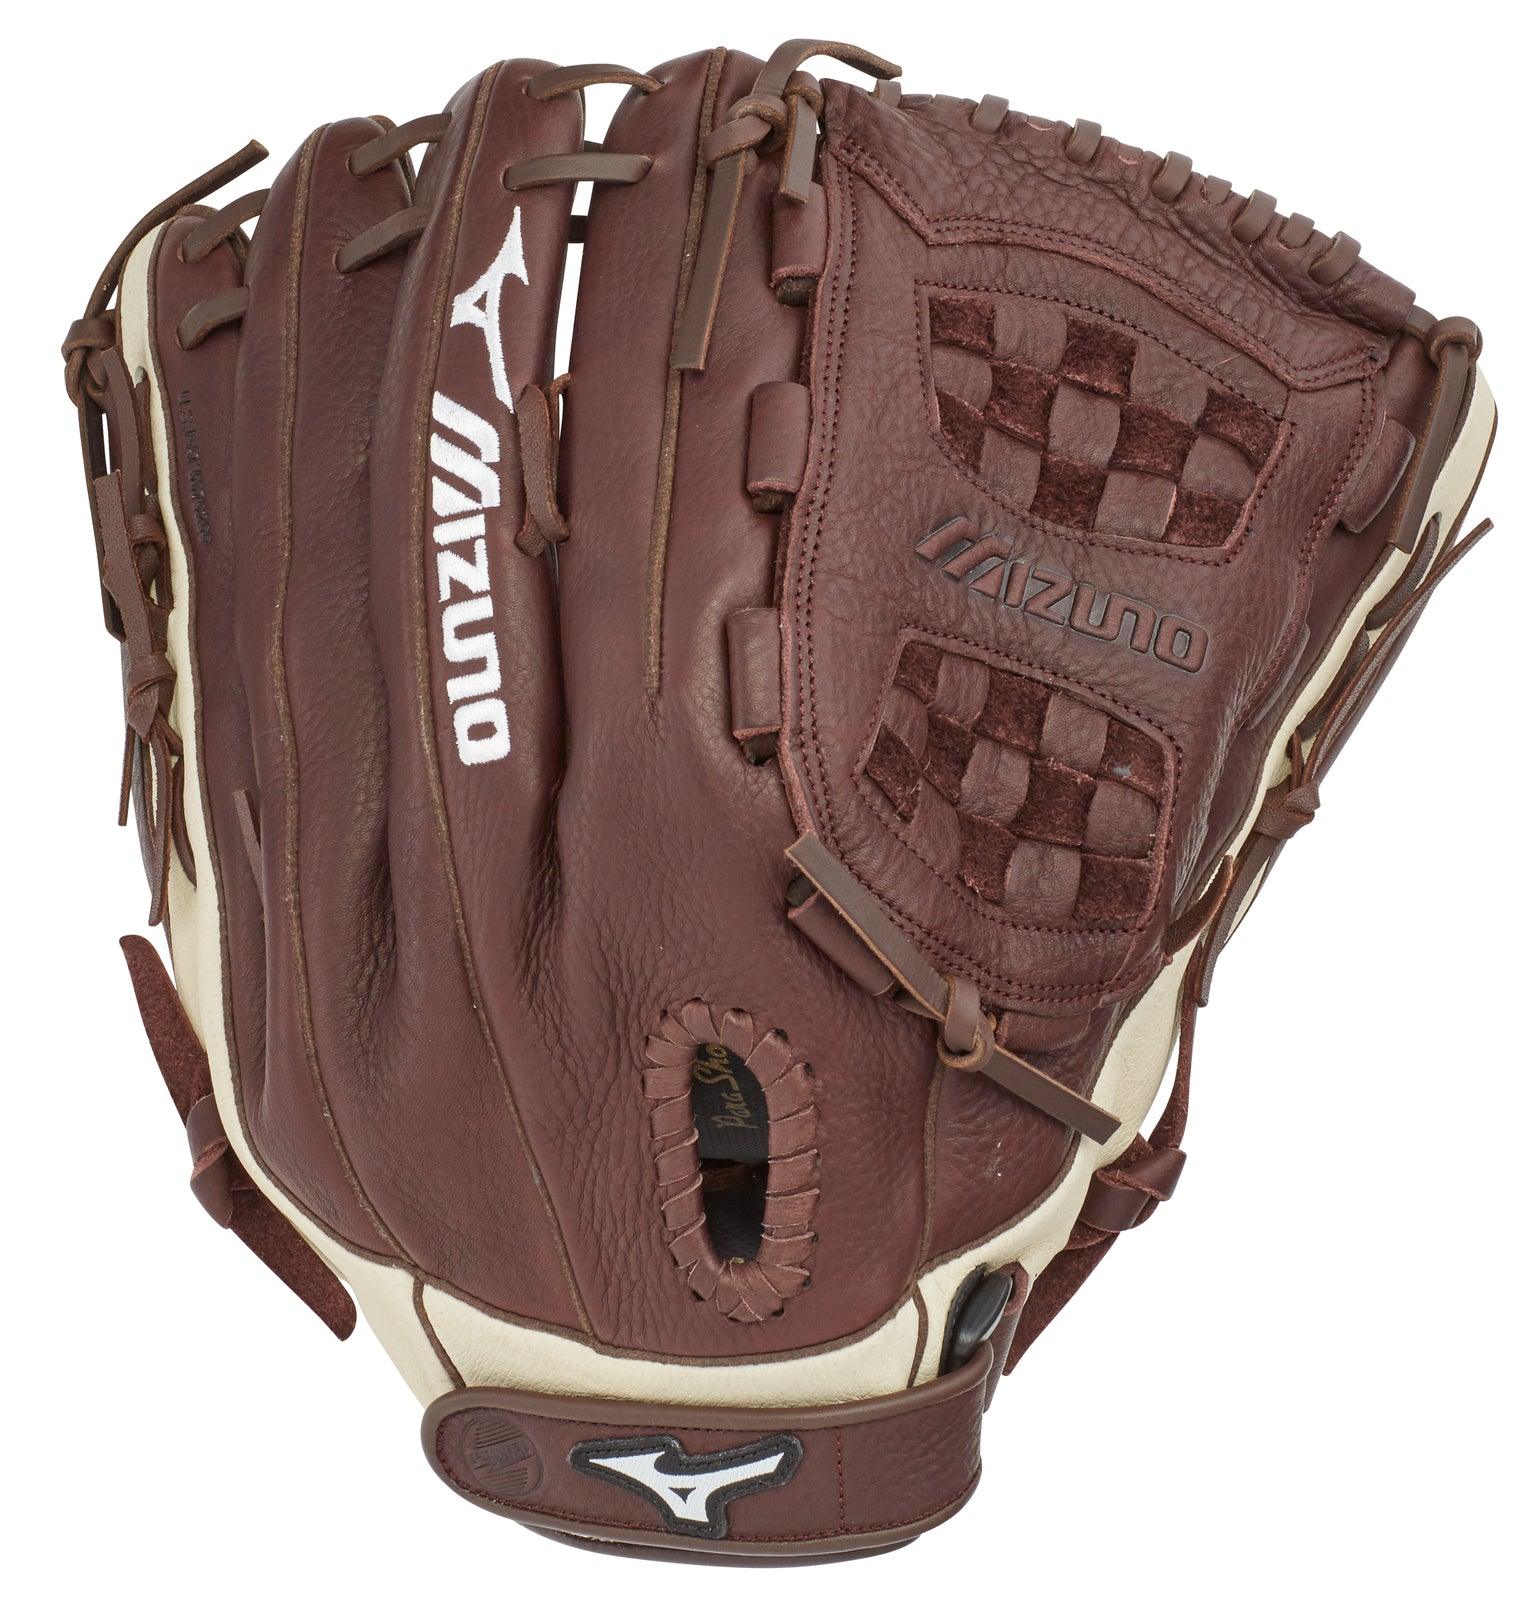 Franchise Series Slowpitch Softball Glove 14" - Sports Excellence